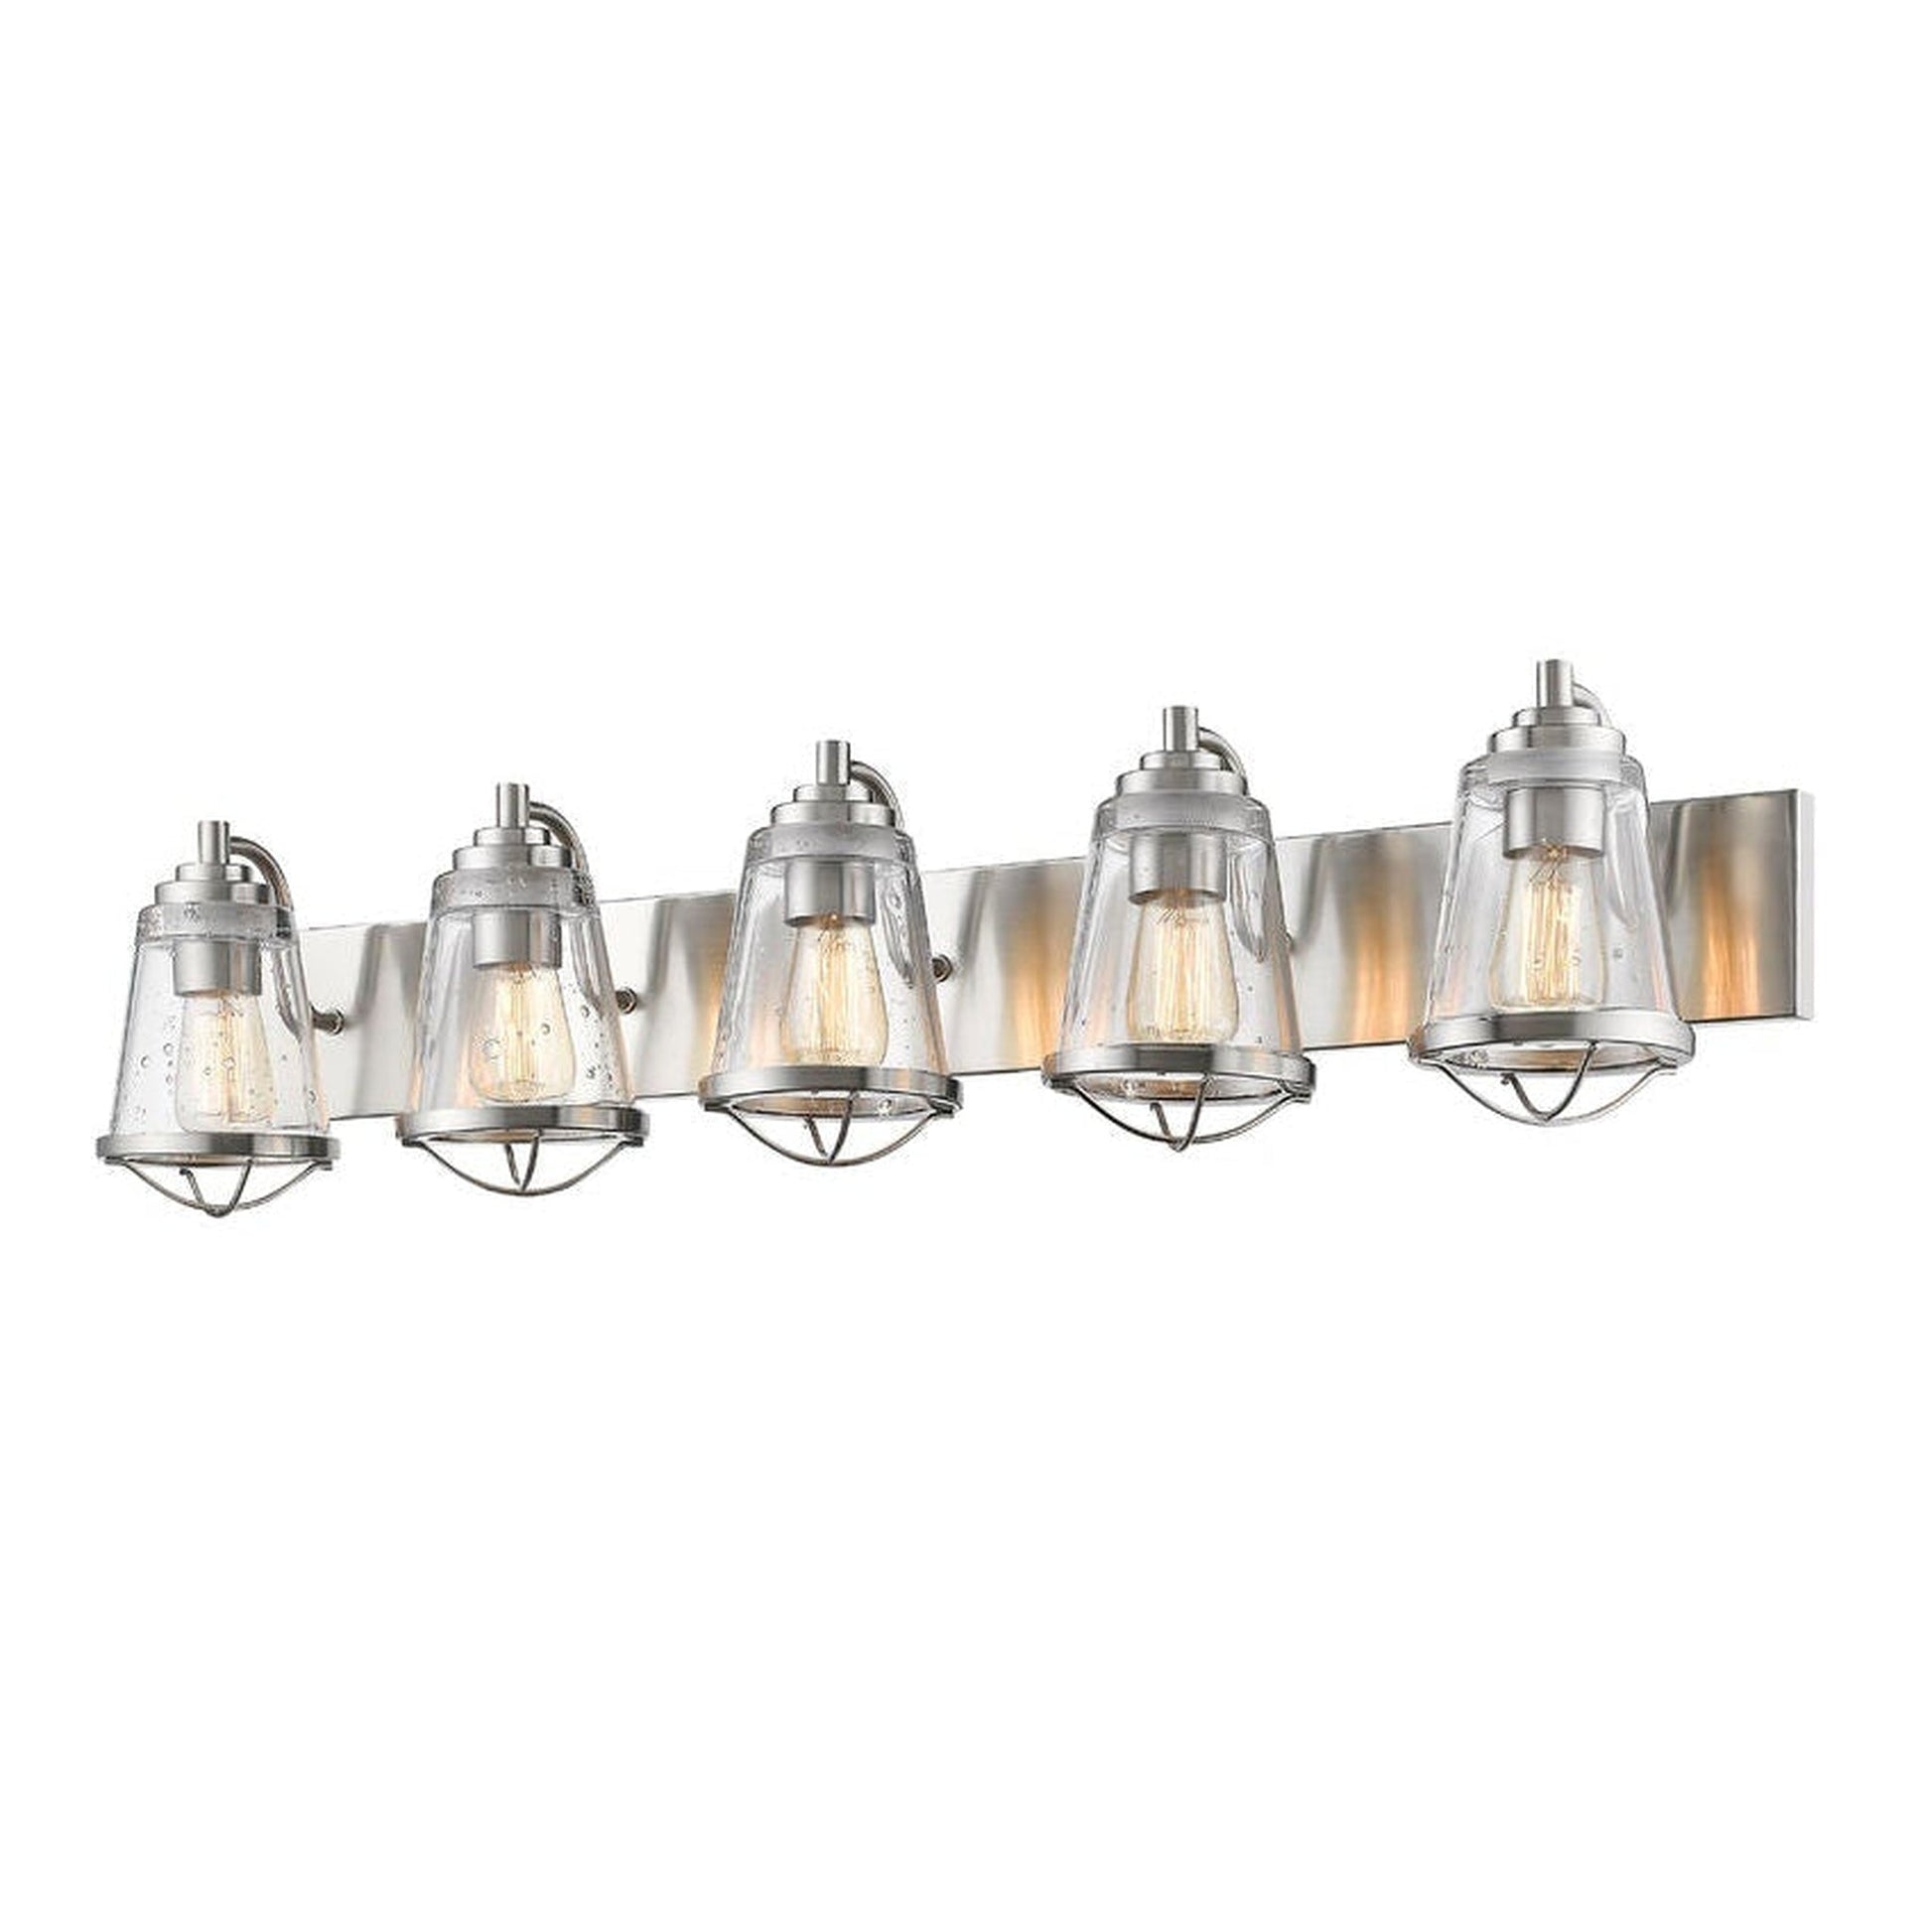 Z-Lite Mariner 40" 5-Light Brushed Nickel Vanity Light With Clear Seedy Glass Shade